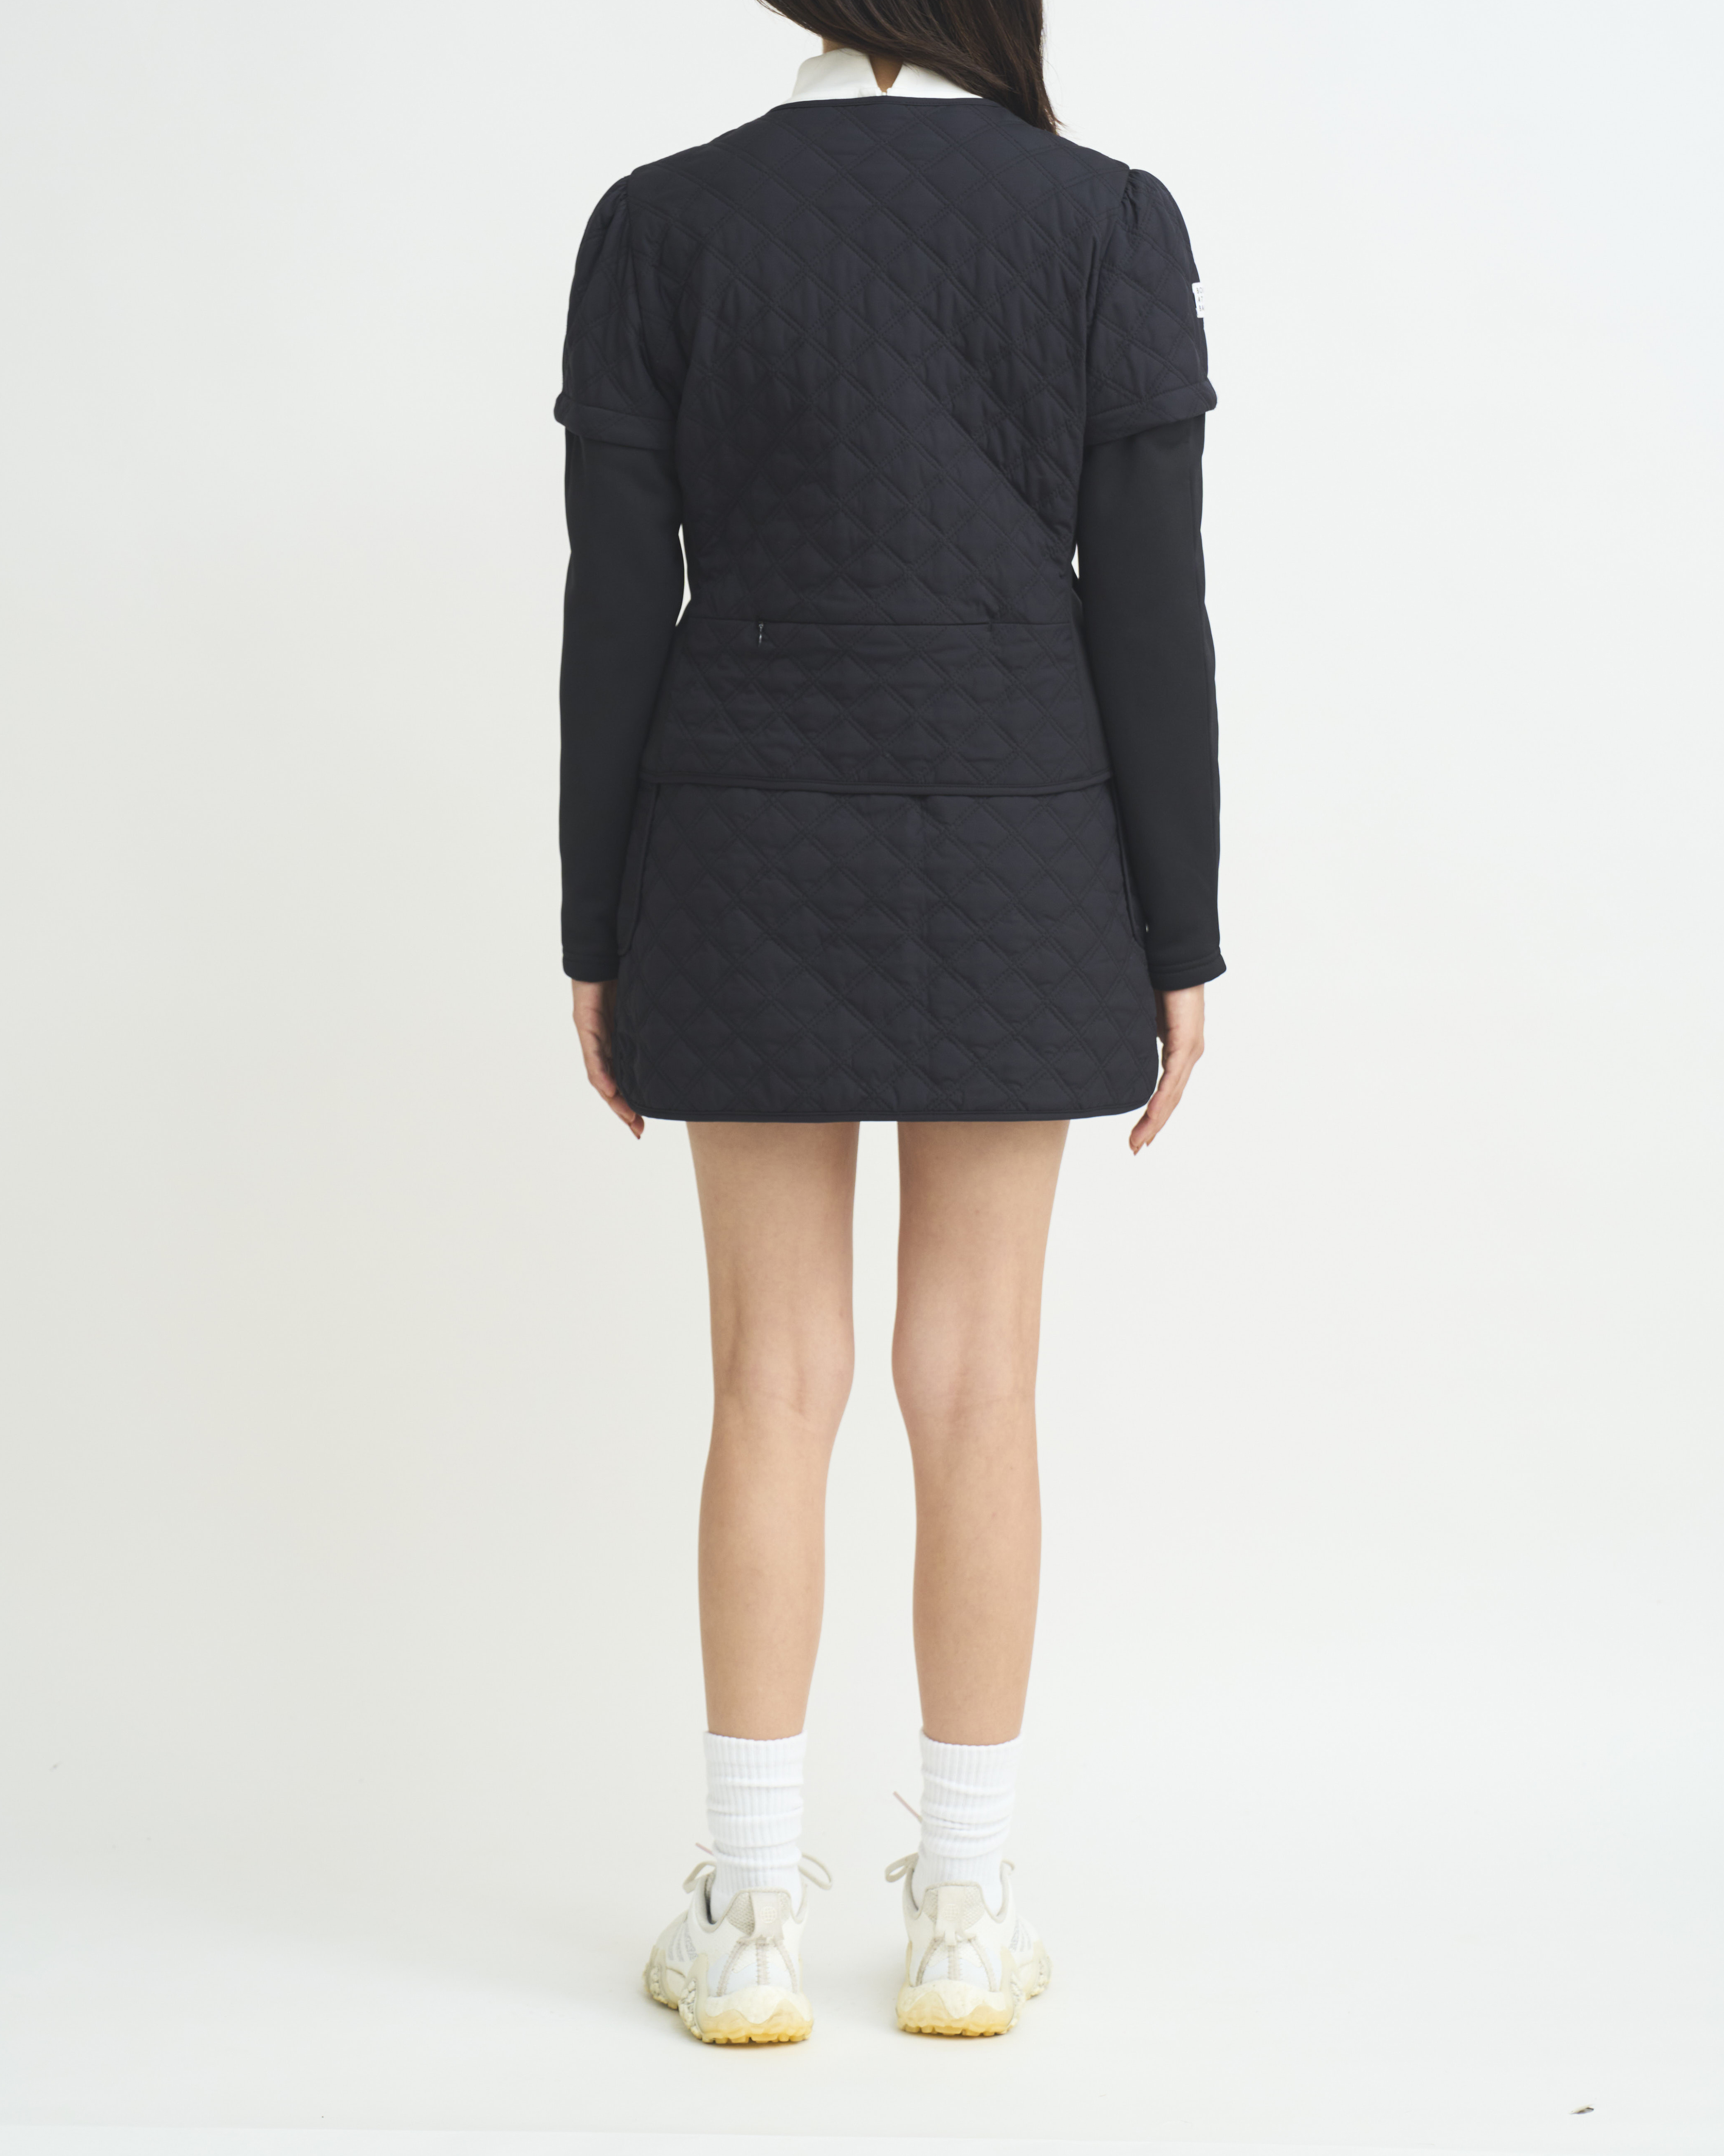 GDT QUILTED MINI SKIRT